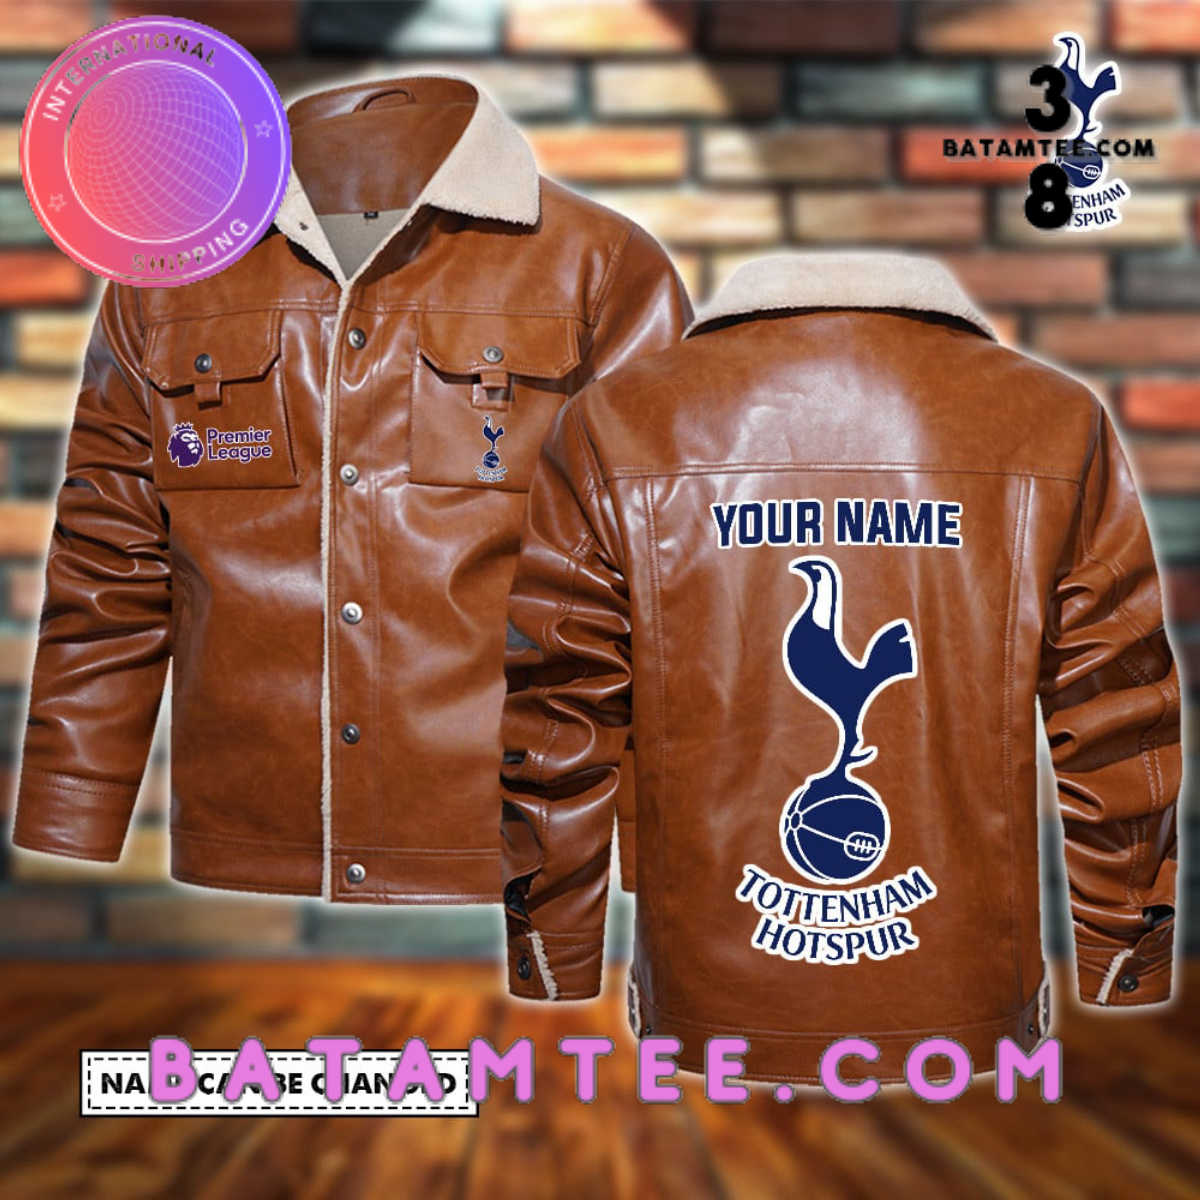 Personalized Leather jacket for Tottenham Hotspur FC fans-Limited Edition's Overview - Batamtee Shop - Threads & Totes: Your Style Destination